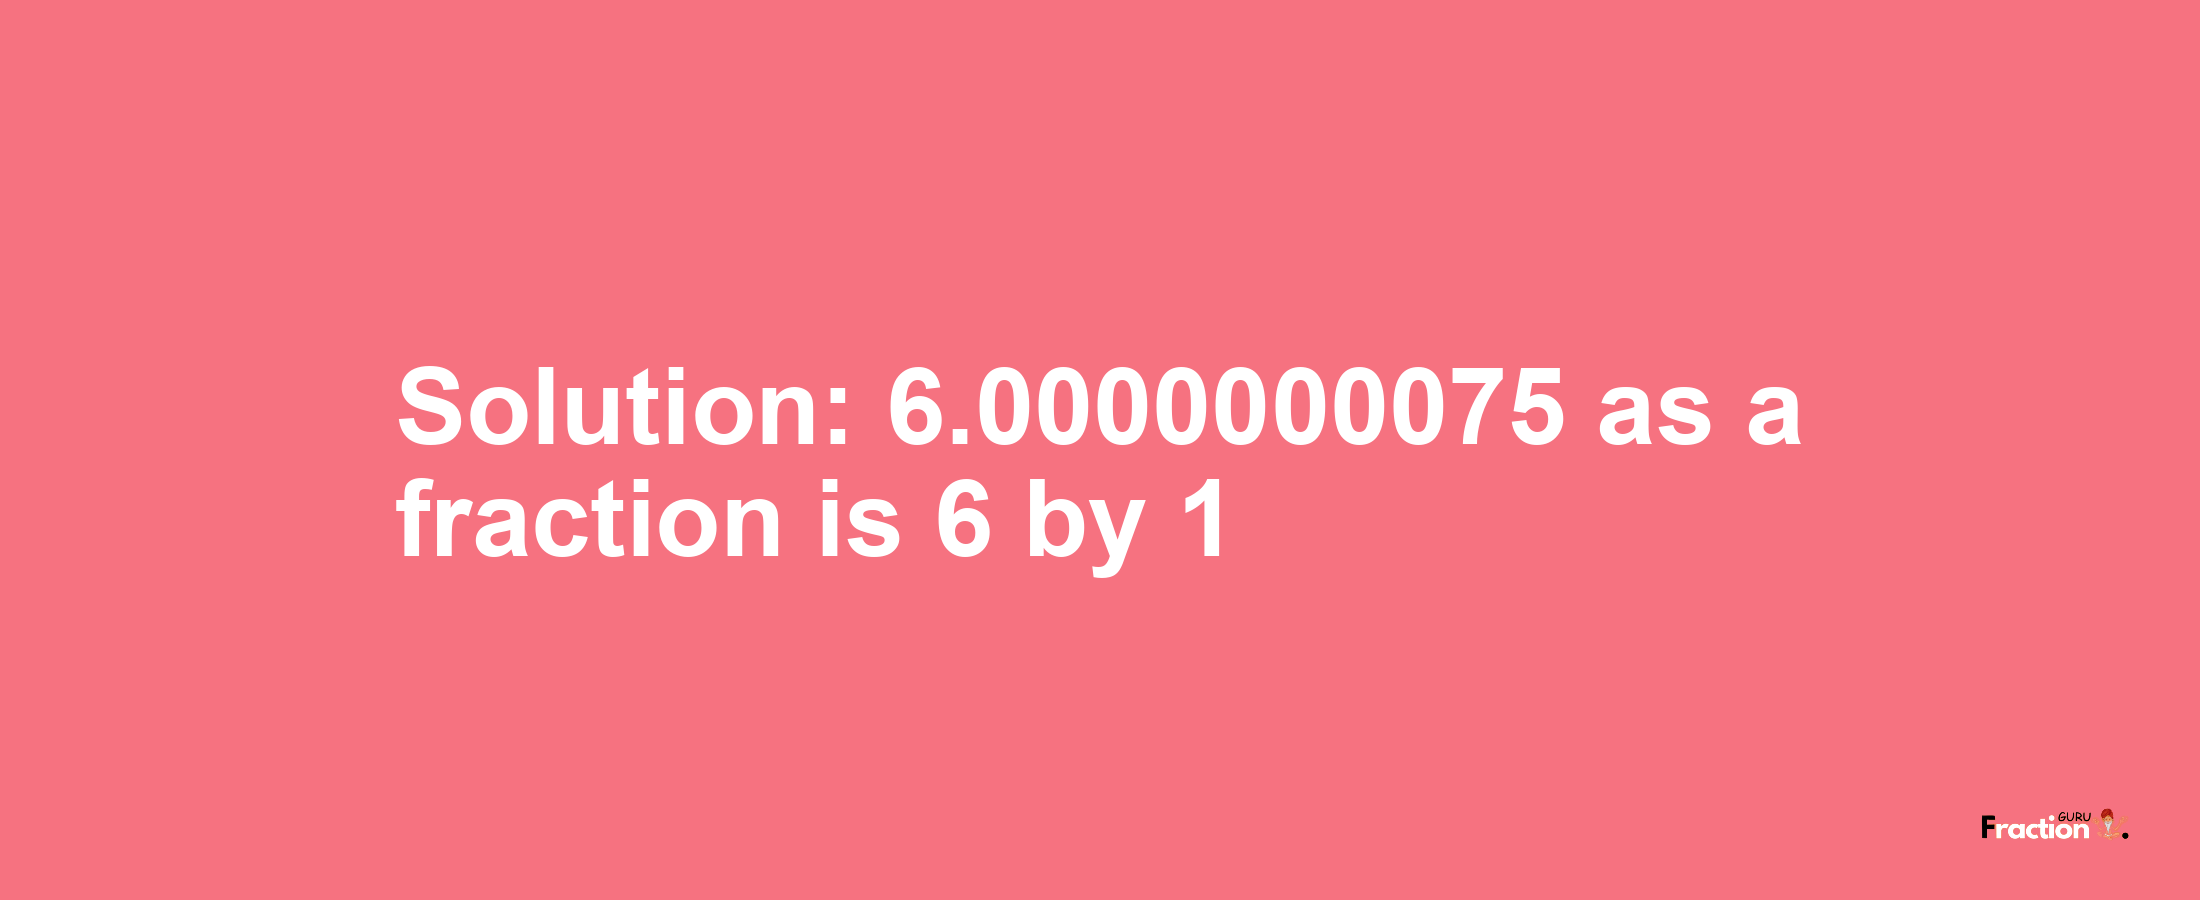 Solution:6.0000000075 as a fraction is 6/1